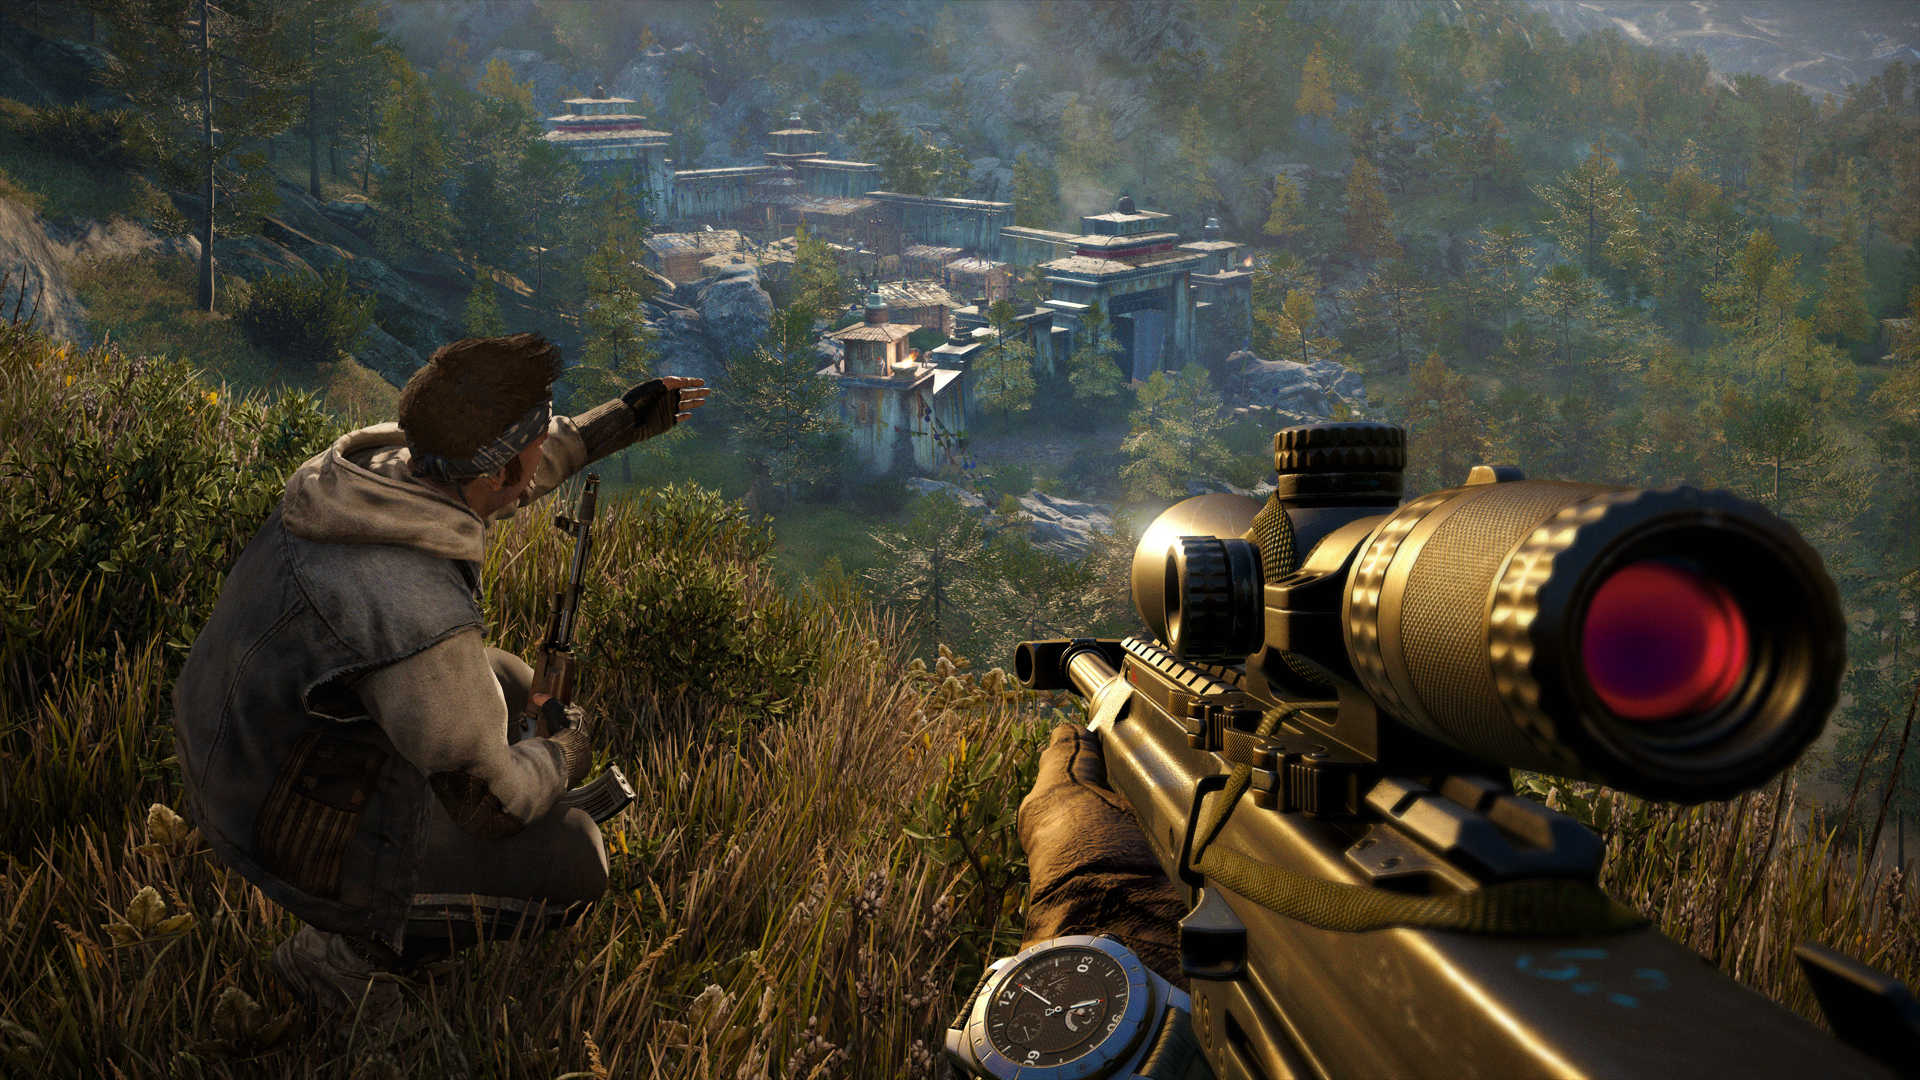 Far Cry 4: Escape From Durgesh Prison review, Games